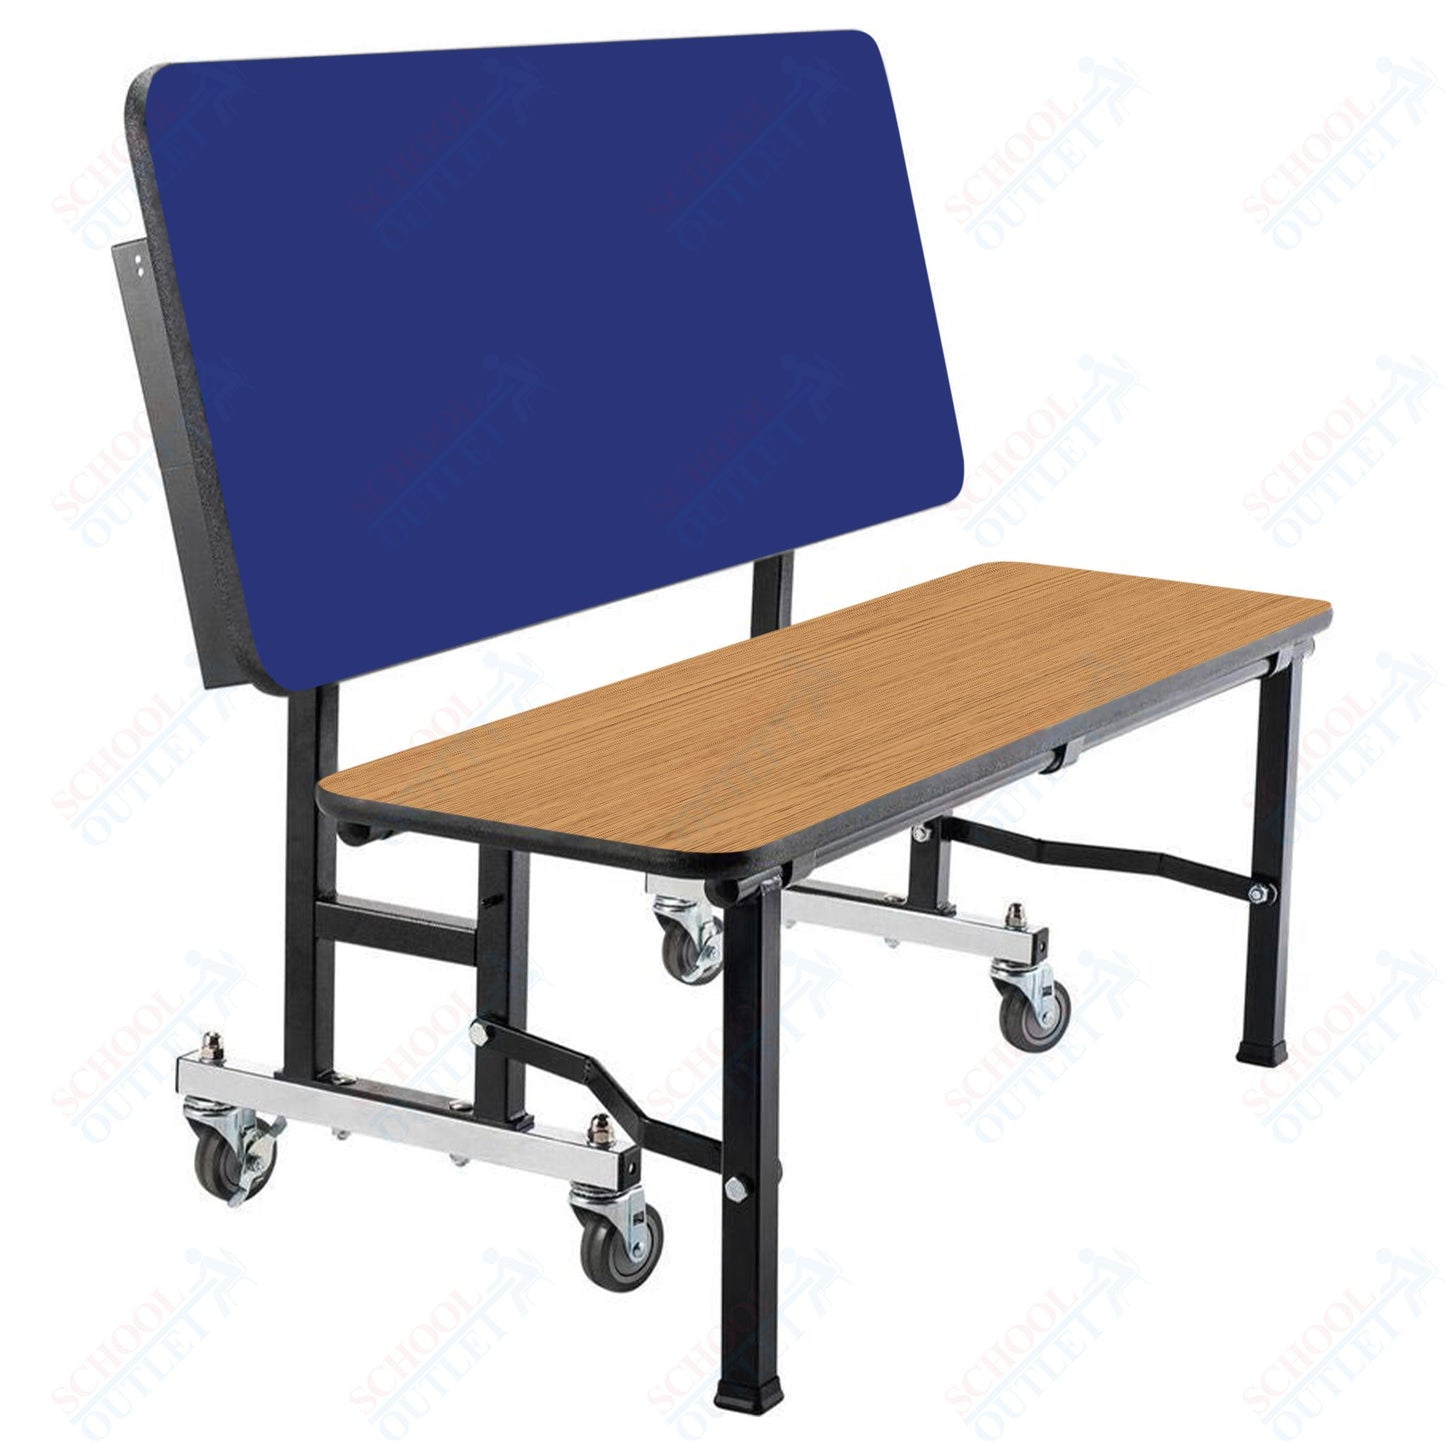 NPS ToGo Bench, 48", Particleboard Core (National Public Seating NPS-TGB48PBTM)